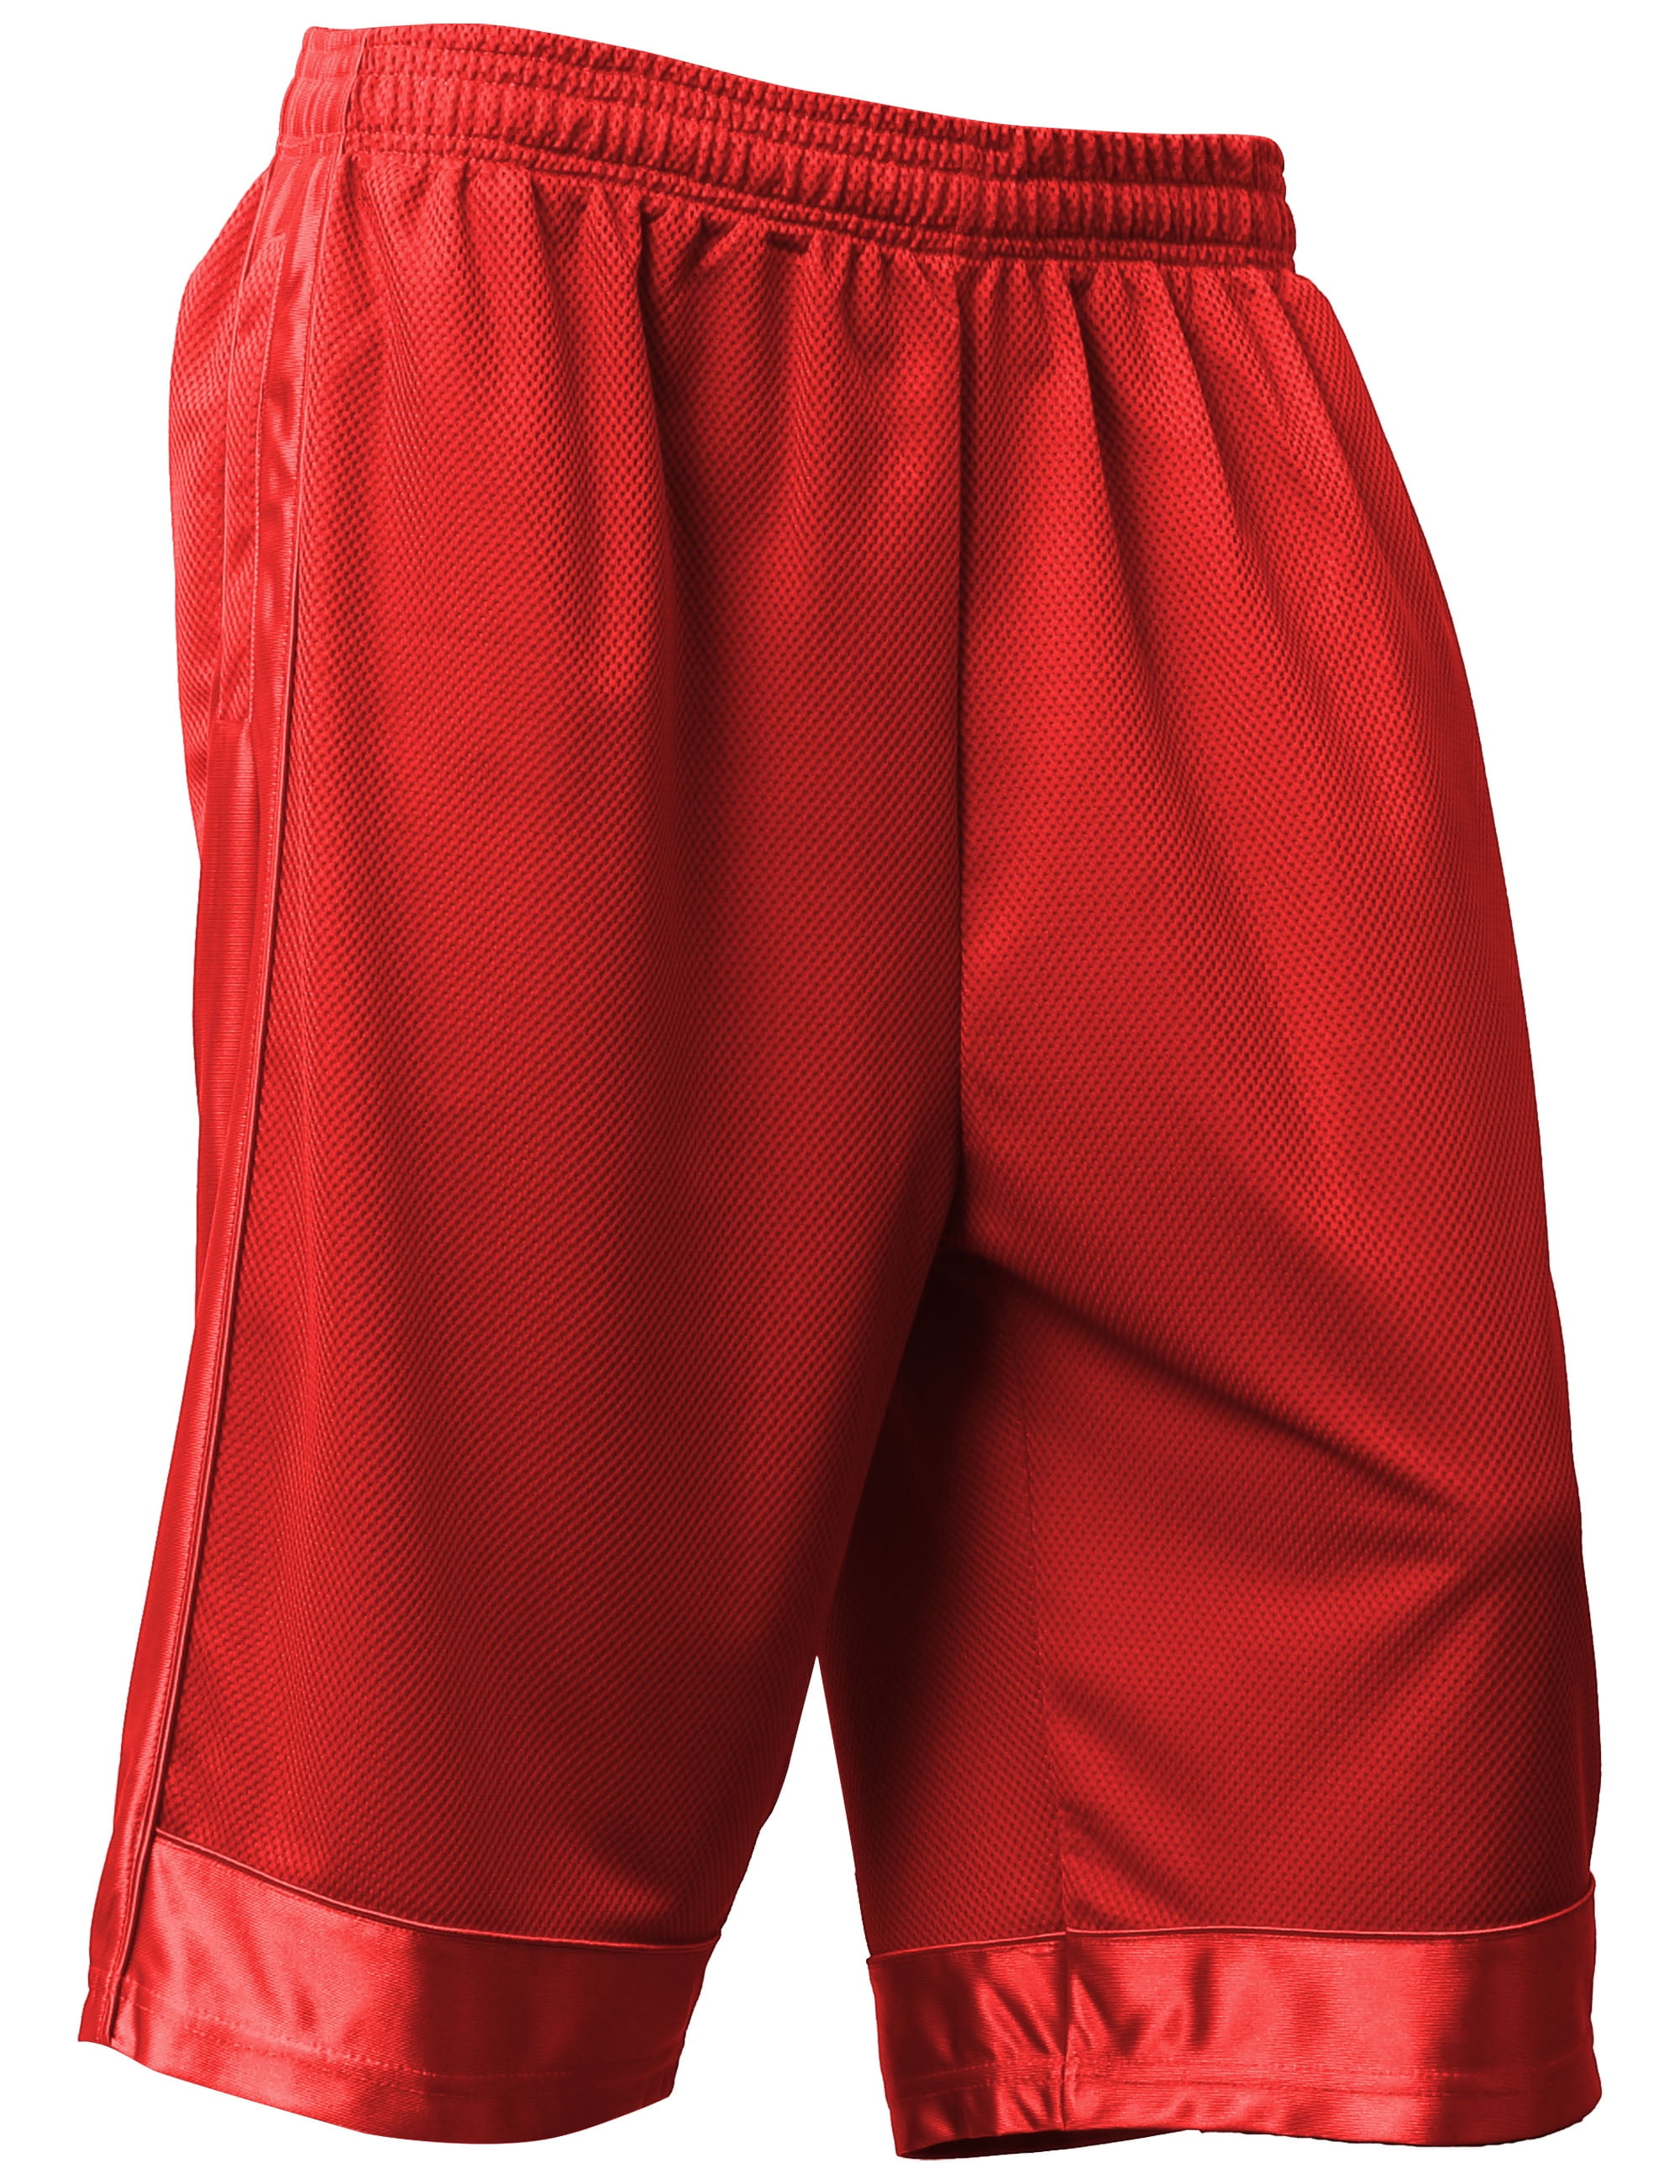 mens jersey shorts with zip pockets